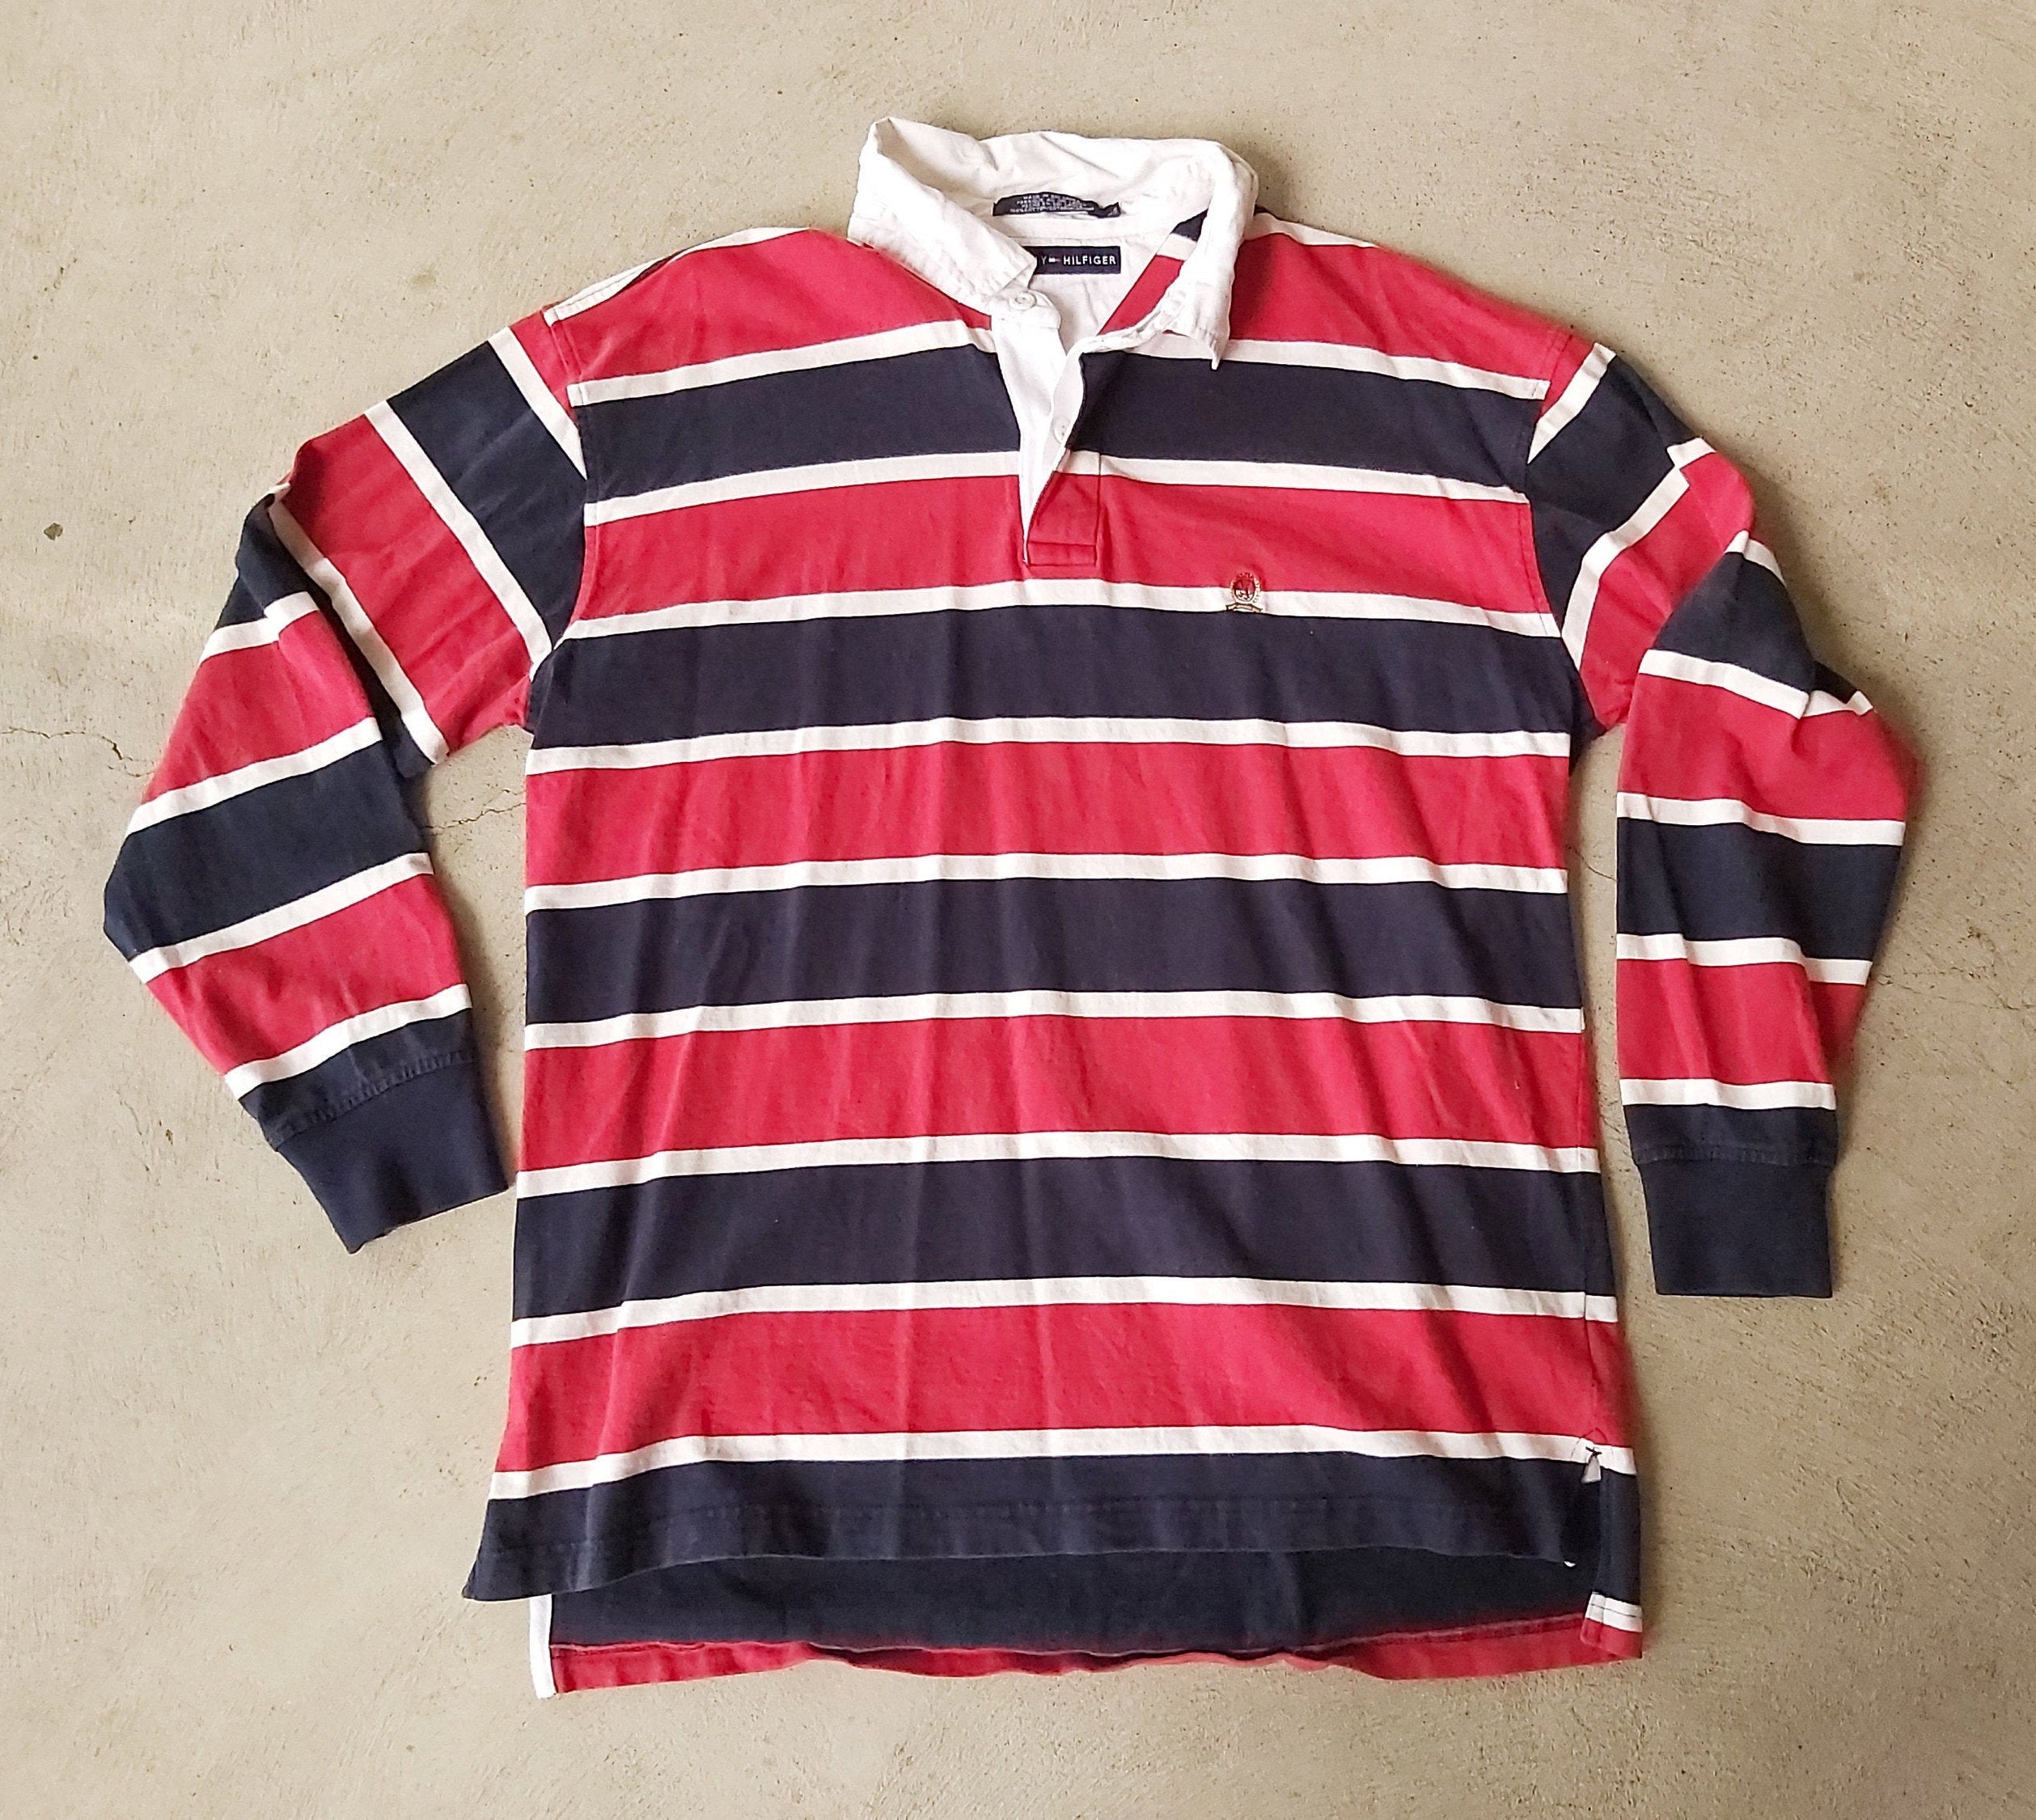 Rfivezteeznmore on Twitter: "Vintage 1990's Hilfiger Shirt / Long Sleeve / (Size L) Red / White / Navy Blue https://t.co/h54TJCgH7Y #tommyhilfiger #vintagetommy #90stommy #tommyjeans #tommyrugby #tommypolo #vintagepolo https://t ...